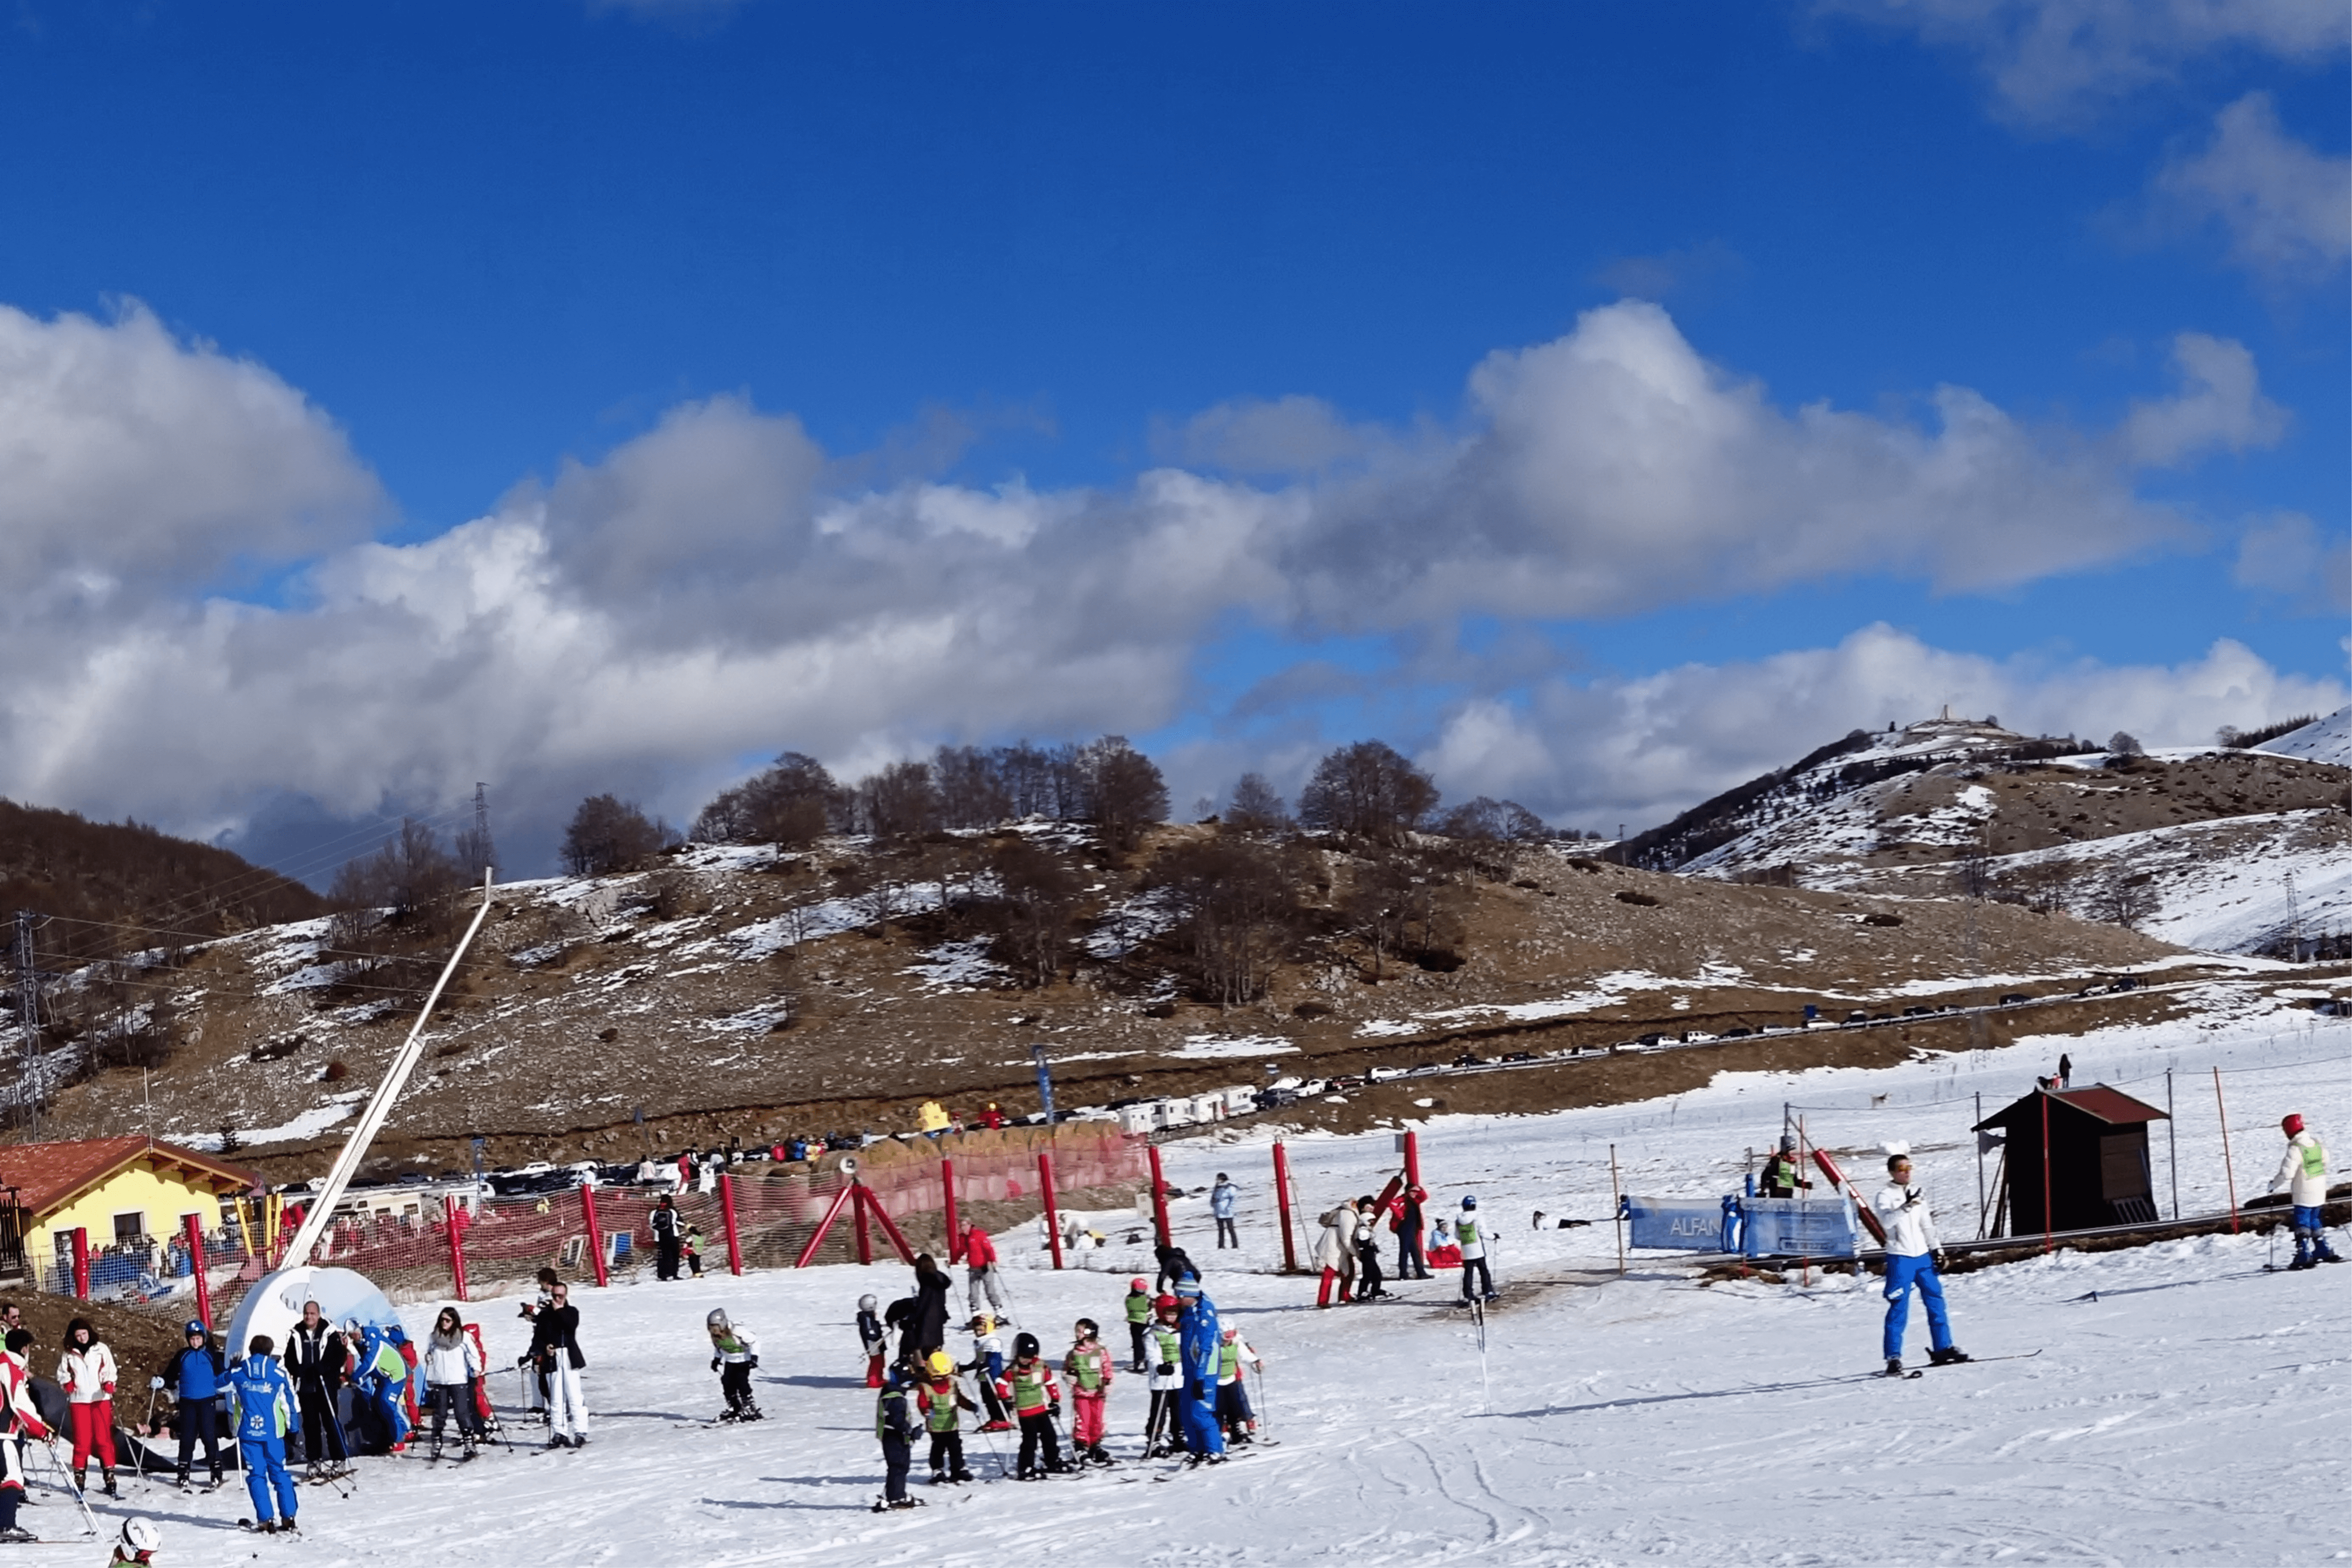 8 Great Places to Take Ski Lessons in England